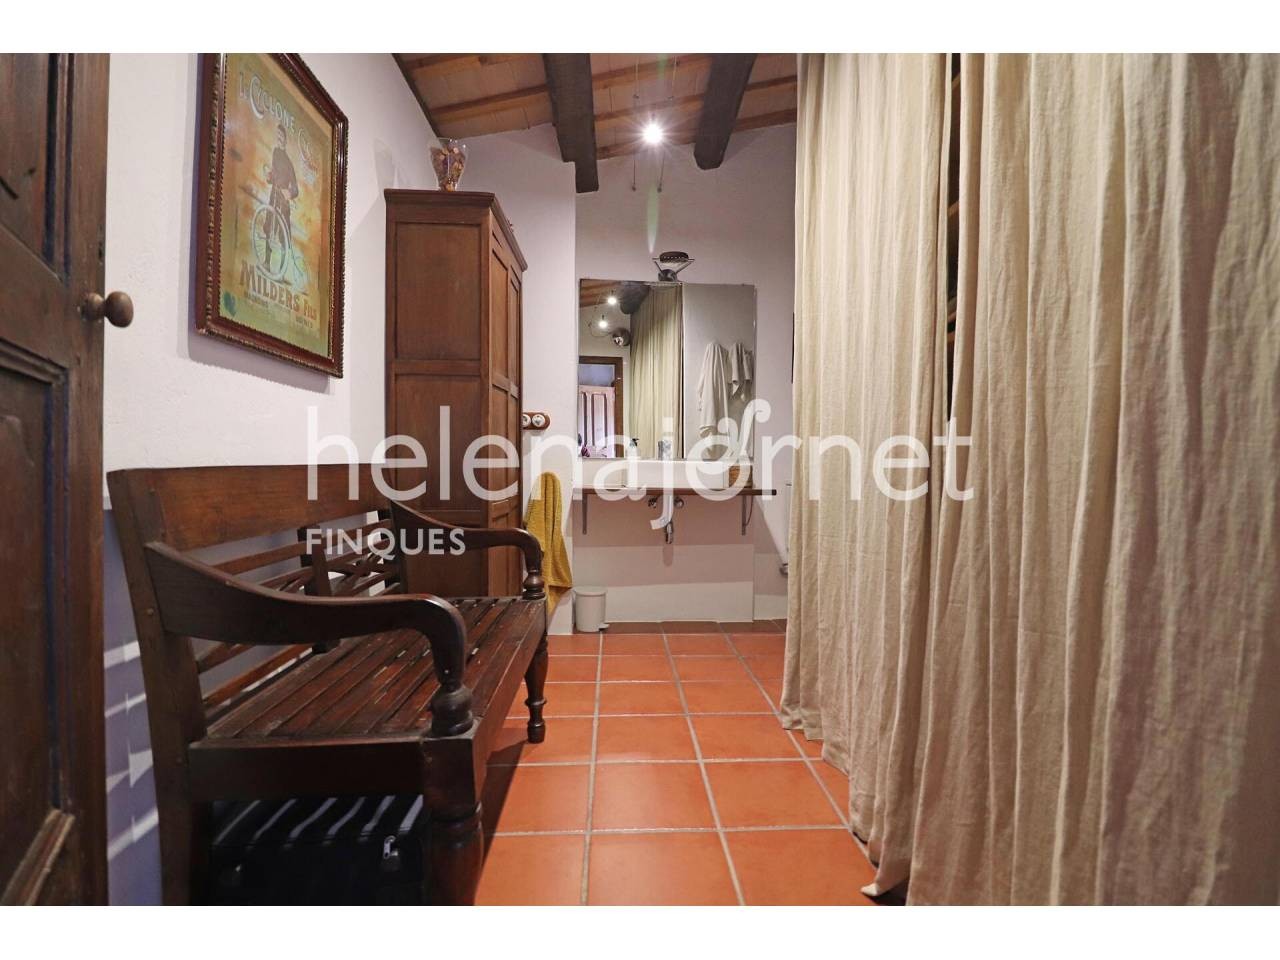 Cosy rustic-style house completely renovated in the centre of Calonge - 2267